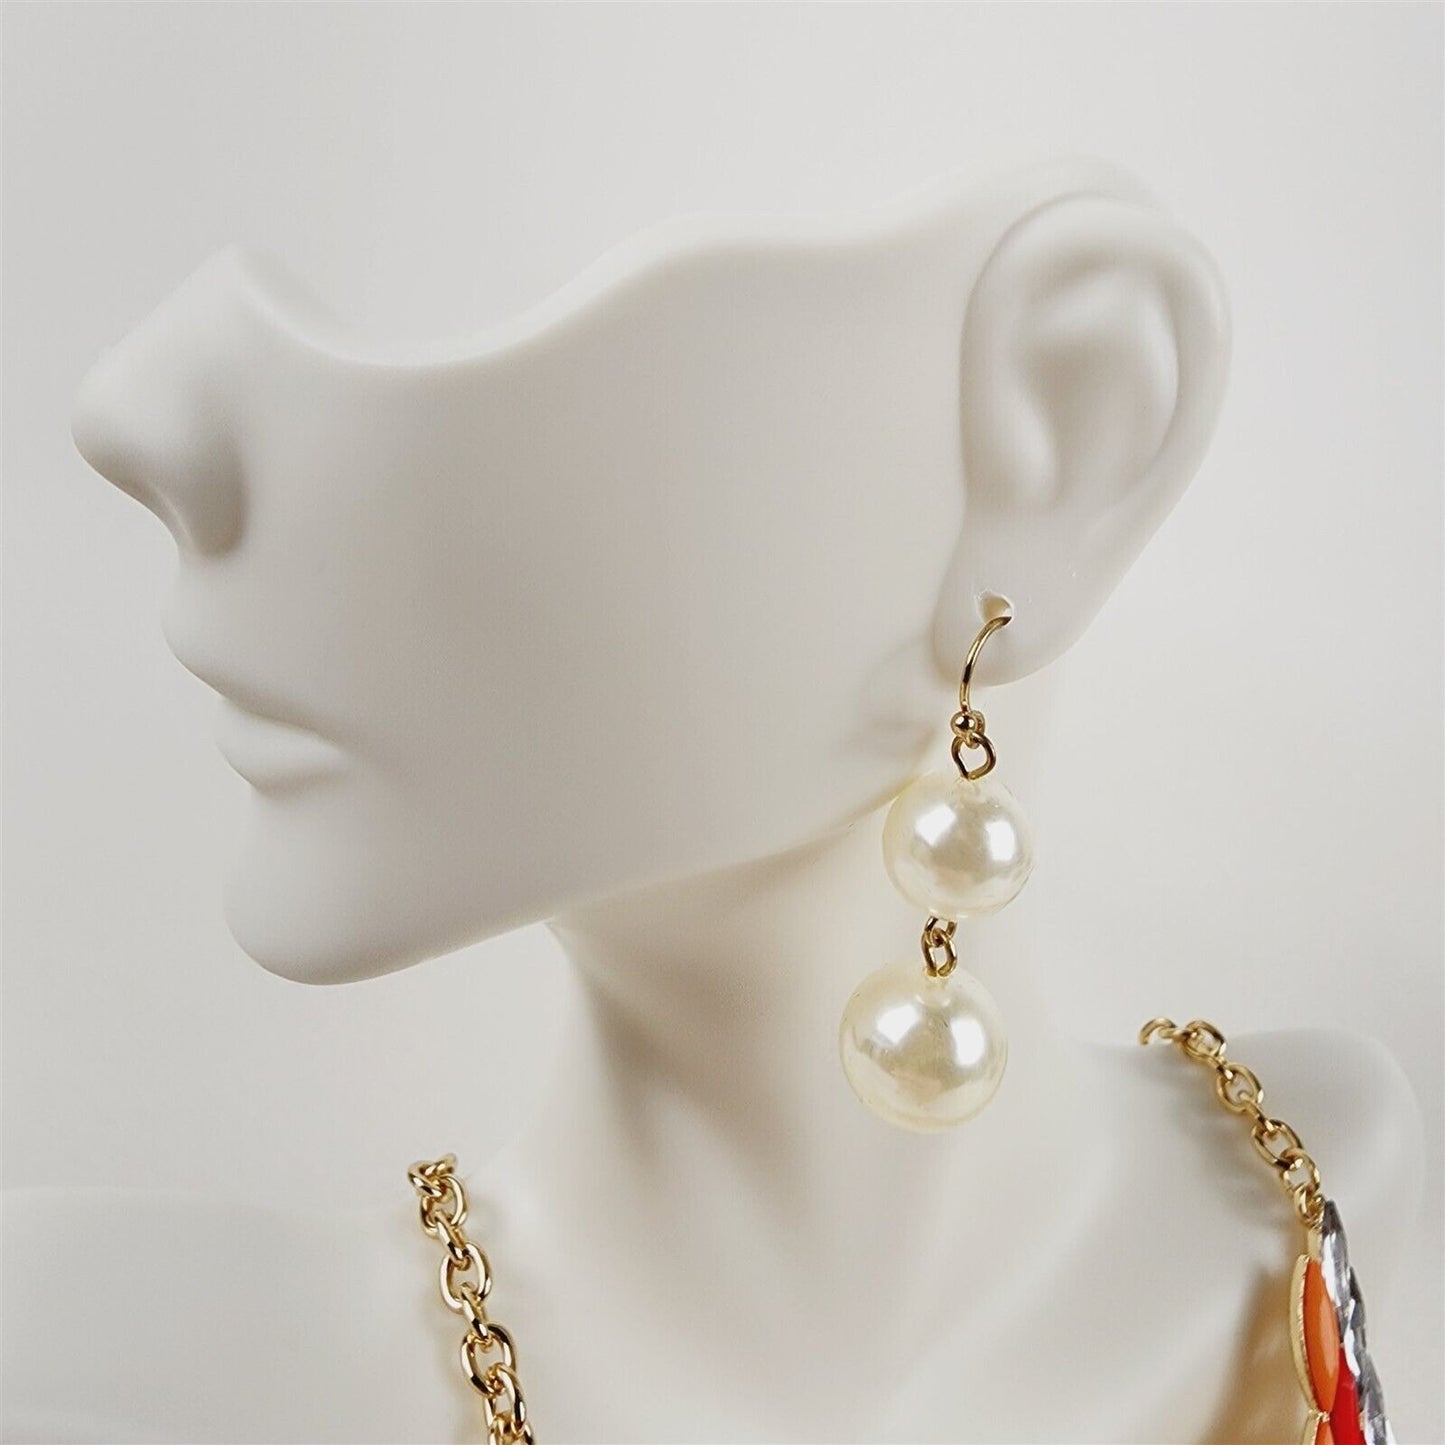 Red Orange Pearl Marquis Floral Necklace Earrings Fashion Jewelry Set